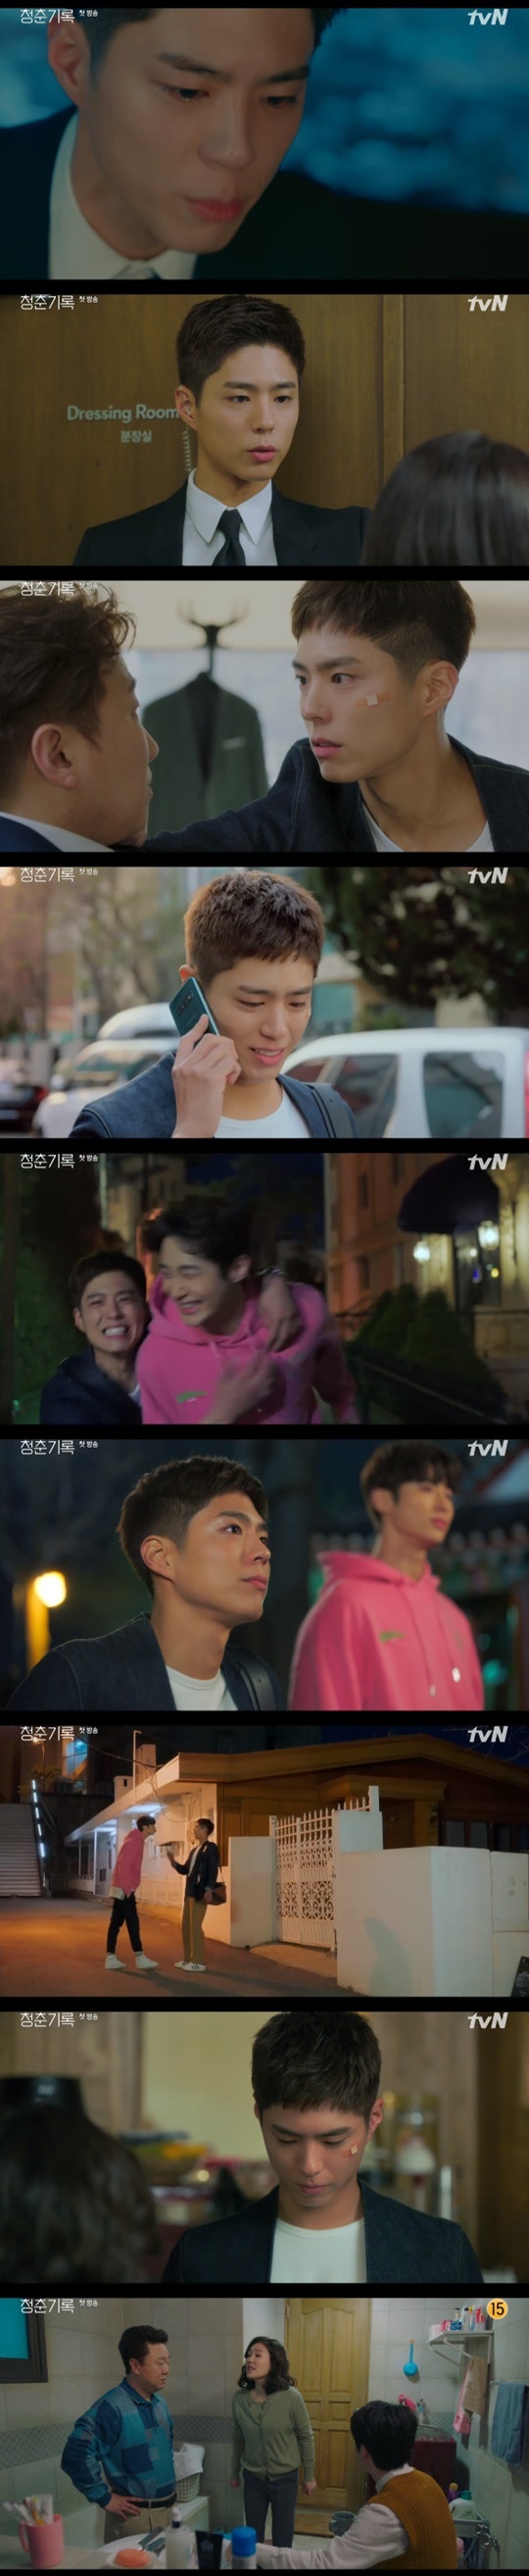 Seoul = = Record of Youth Park Bo-gum struggled with the undead reality.In TVNs new Mon-Tue drama Record of Youth (playplayplay by Ha Myung-hee/director Ahn Gil-ho), which was first broadcast on the afternoon of the 7th, Sa Hye-joon (Park Bo-gum), who worked as a model for seven years and struggled to become an actor, was portrayed.Sa Hye-joon has been busy with various Alba such as movie audition, bodyguard, and meat house.Sa Hye-joon, who has suffered from a hard time from the delayed payment of the agency to the termination of the contract, is a close friend and a good model and actor Won Hae-hyo (played by Woo-suk).I have never tried to be like him. Such efforts and dreams of Sa Hye-joon were compared to the wind or floating clouds and treated as cowards.The only thing that believed and supported Sa Hye-joon was his grandfather, Sam Min-ki (Han Jin-hee), who had suffered his family because he had no life.Sa Hye-joon, who did Alba because he could not join his family meal meeting to commemorate his first day of work, was sincere enough to be proposed as a manager of a meat house.In his dreams, Sa Hye-joon said, When I lived, human beings were the first to have their own interests.After everything was over, Sa Hye-joon met with his close friends Won Hae-hyo and Kim Jin-woo (Kwon Soo-hyun) and ran around the neighborhood and stressed.Won Hae Hyo was worried about Sa Hye-joon, who seemed to be full of troubles, and Sa Hye-joon said, How can time be fair? He said bitterly, I am constantly being attacked.In addition, Sa Hye-joon confessed to Won Hae-hyo, If not, I think I have done enough to go to the army.When Won Hae Hyo, who was going to go to the army together, said, When I get older, Friend changes, so do I live.Then Won Hae Hyo said, We were different from the beginning. Sa Hye-joon said, If it changes, it is not because of the situation but because of innocence.To such a Hye-joon, Won Hae-hyo laughed, I love you, and the two sticky people continued.In the letter of admission that flew home, Sa Hye-joon told his mother Han Ae-sook (Ha Hee-ra) that he thought auditioning for the movie was his last chance and said he would postpone it.Unlike Han Ae-sook, who is trying to wait for the choice of Sa Hye-joon, his brother Sa Kyung-joon and his father Sa Yeong-nam (Park Soo-young) have been rampant for a long time, and conflicts with their families have exploded, adding to their curiosity about future development.On the other hand, tvN Mon-Tue drama Record of Youth is a drama depicting the growth Record of Youth who try to achieve their dreams and love without despairing on the wall of reality.